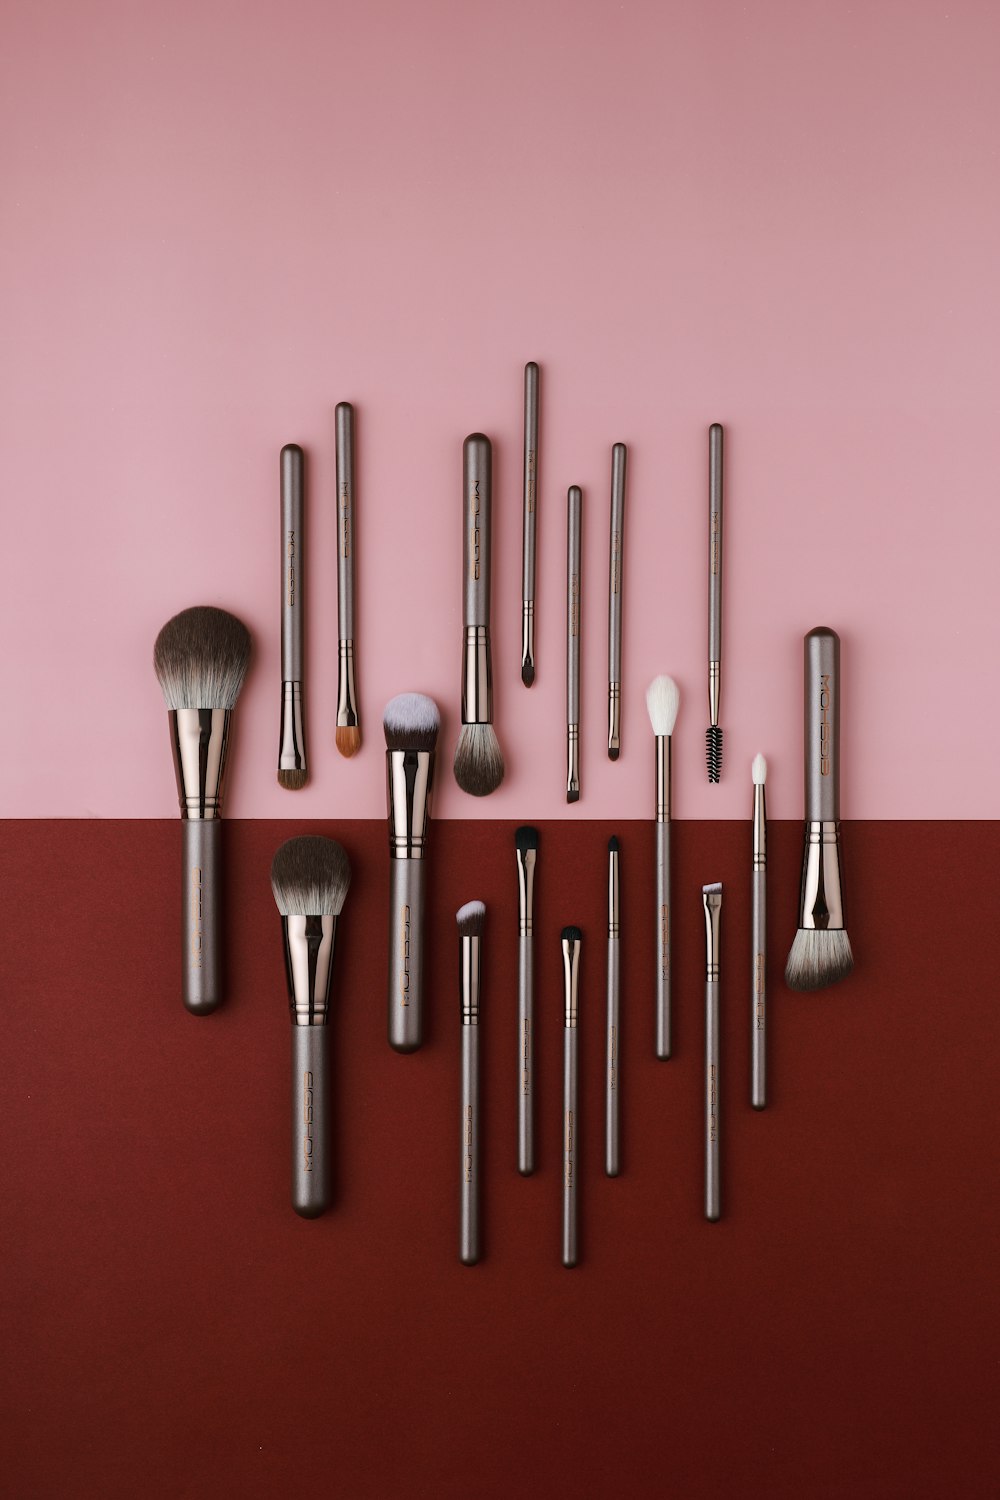 a collection of makeup brushes on a pink and red background